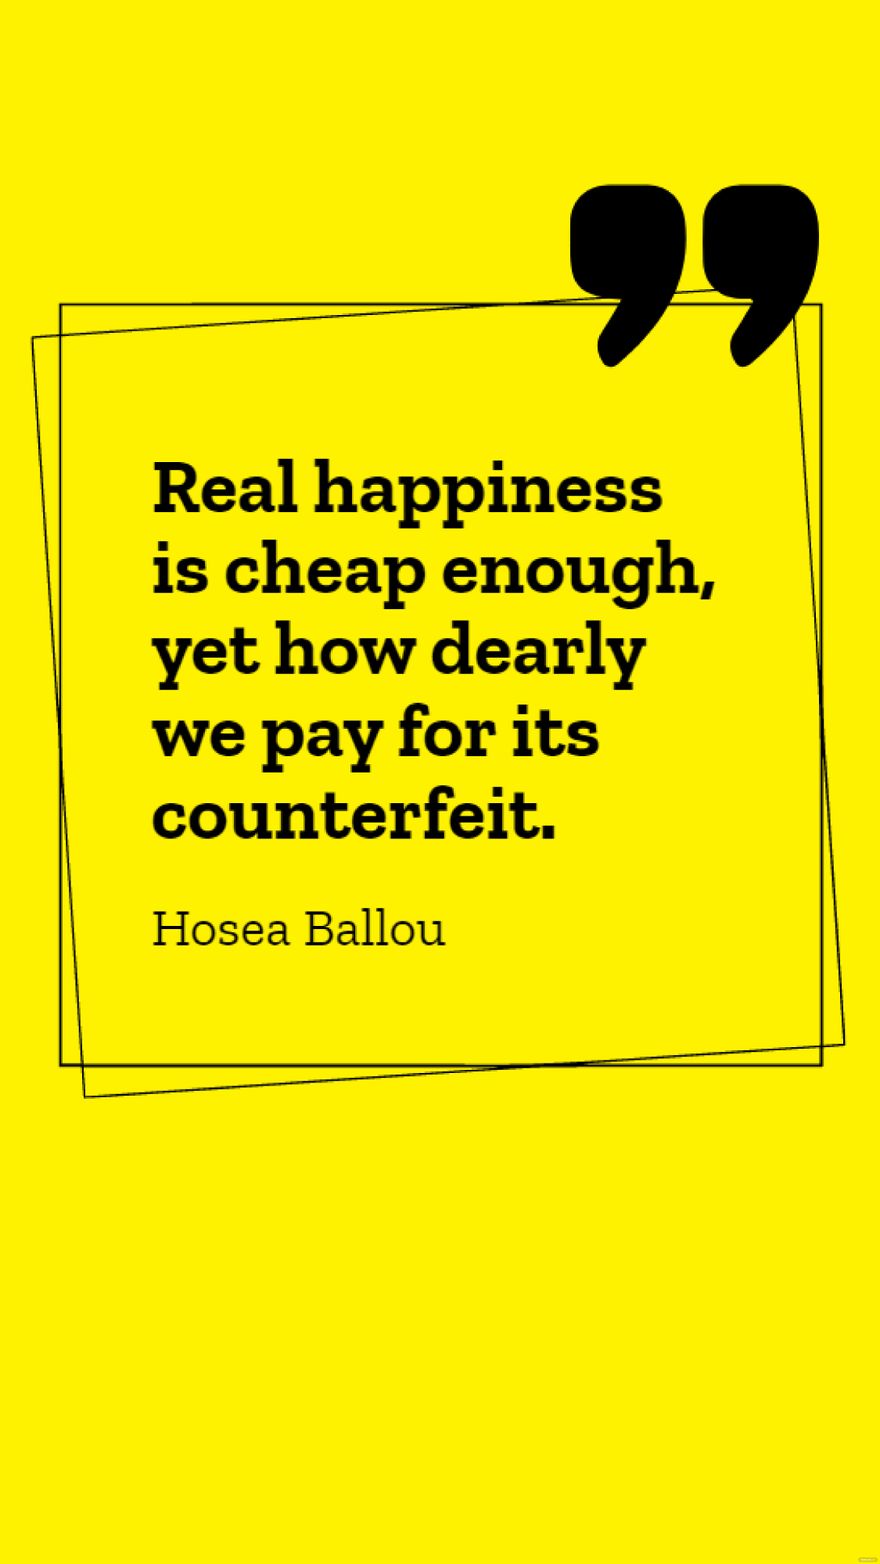 Hosea Ballou - Real happiness is cheap enough, yet how dearly we pay for its counterfeit. in JPG